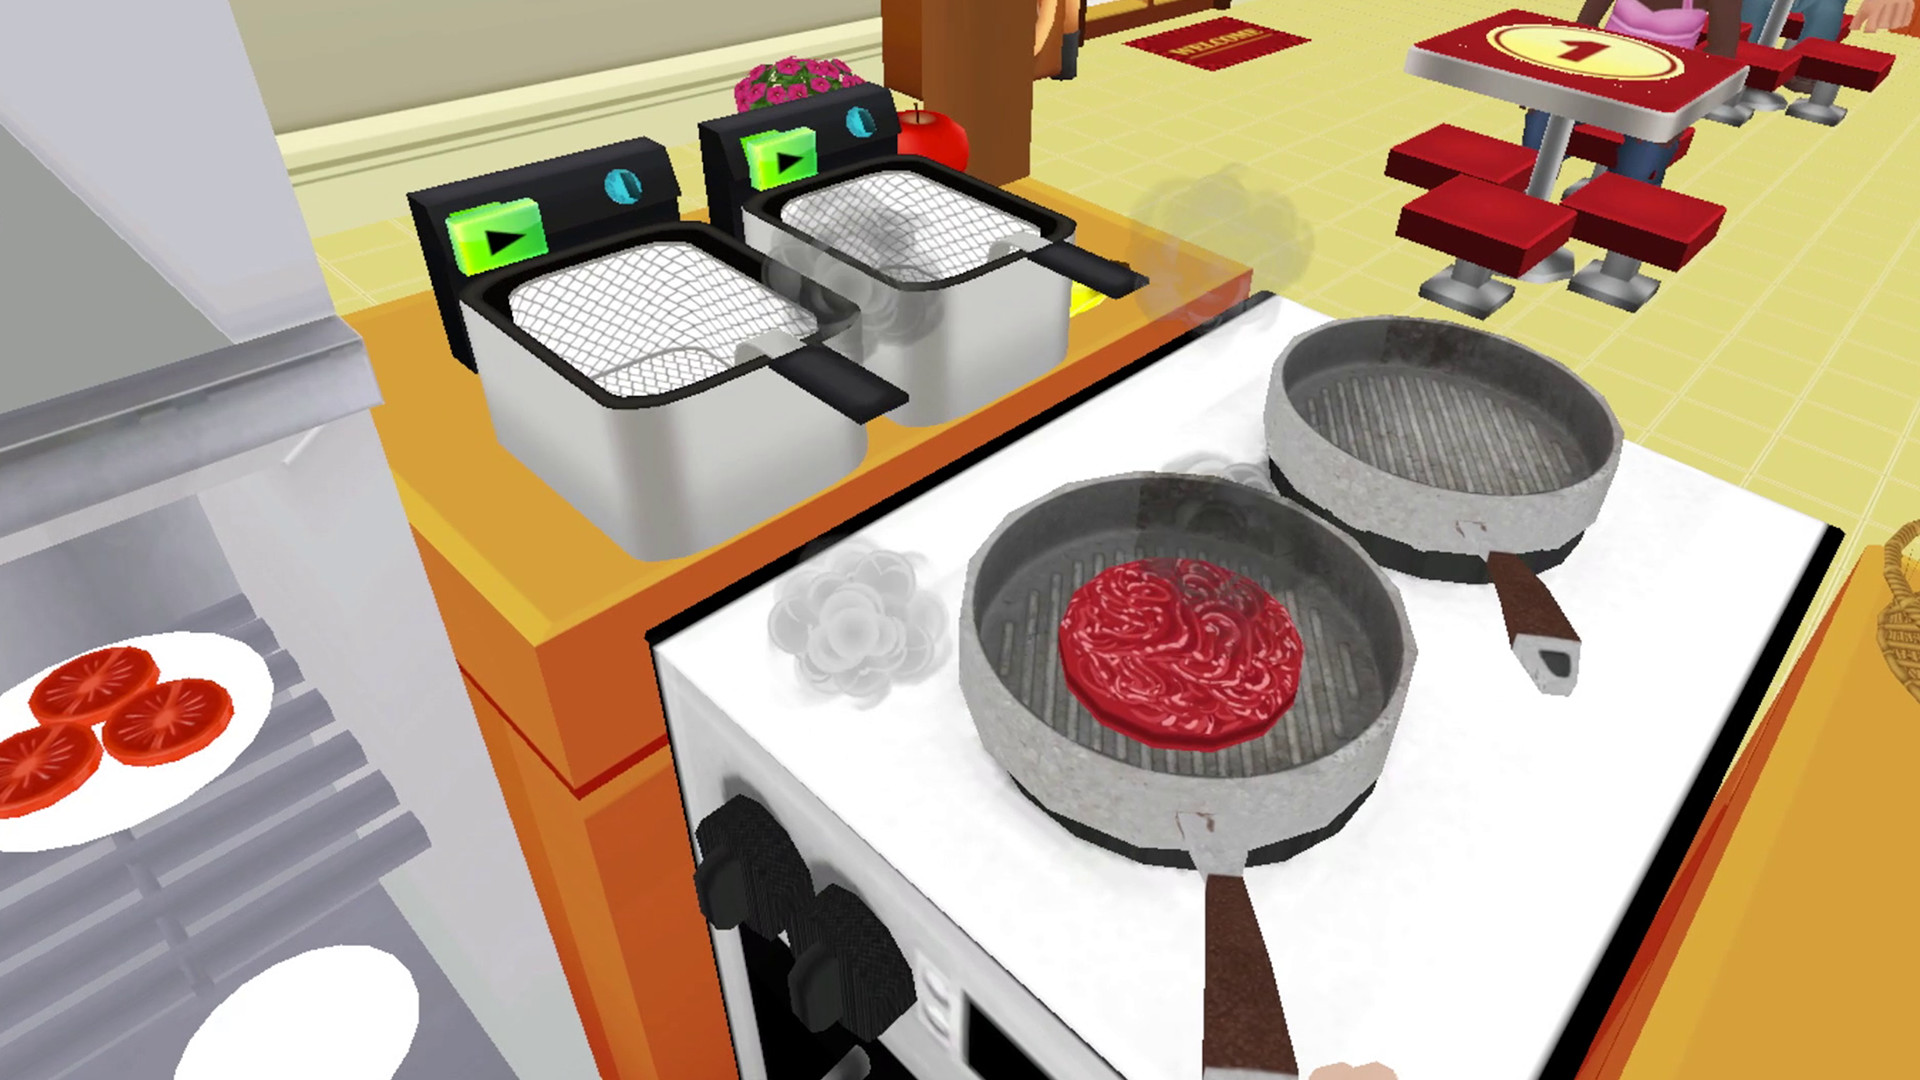 best vr cooking game